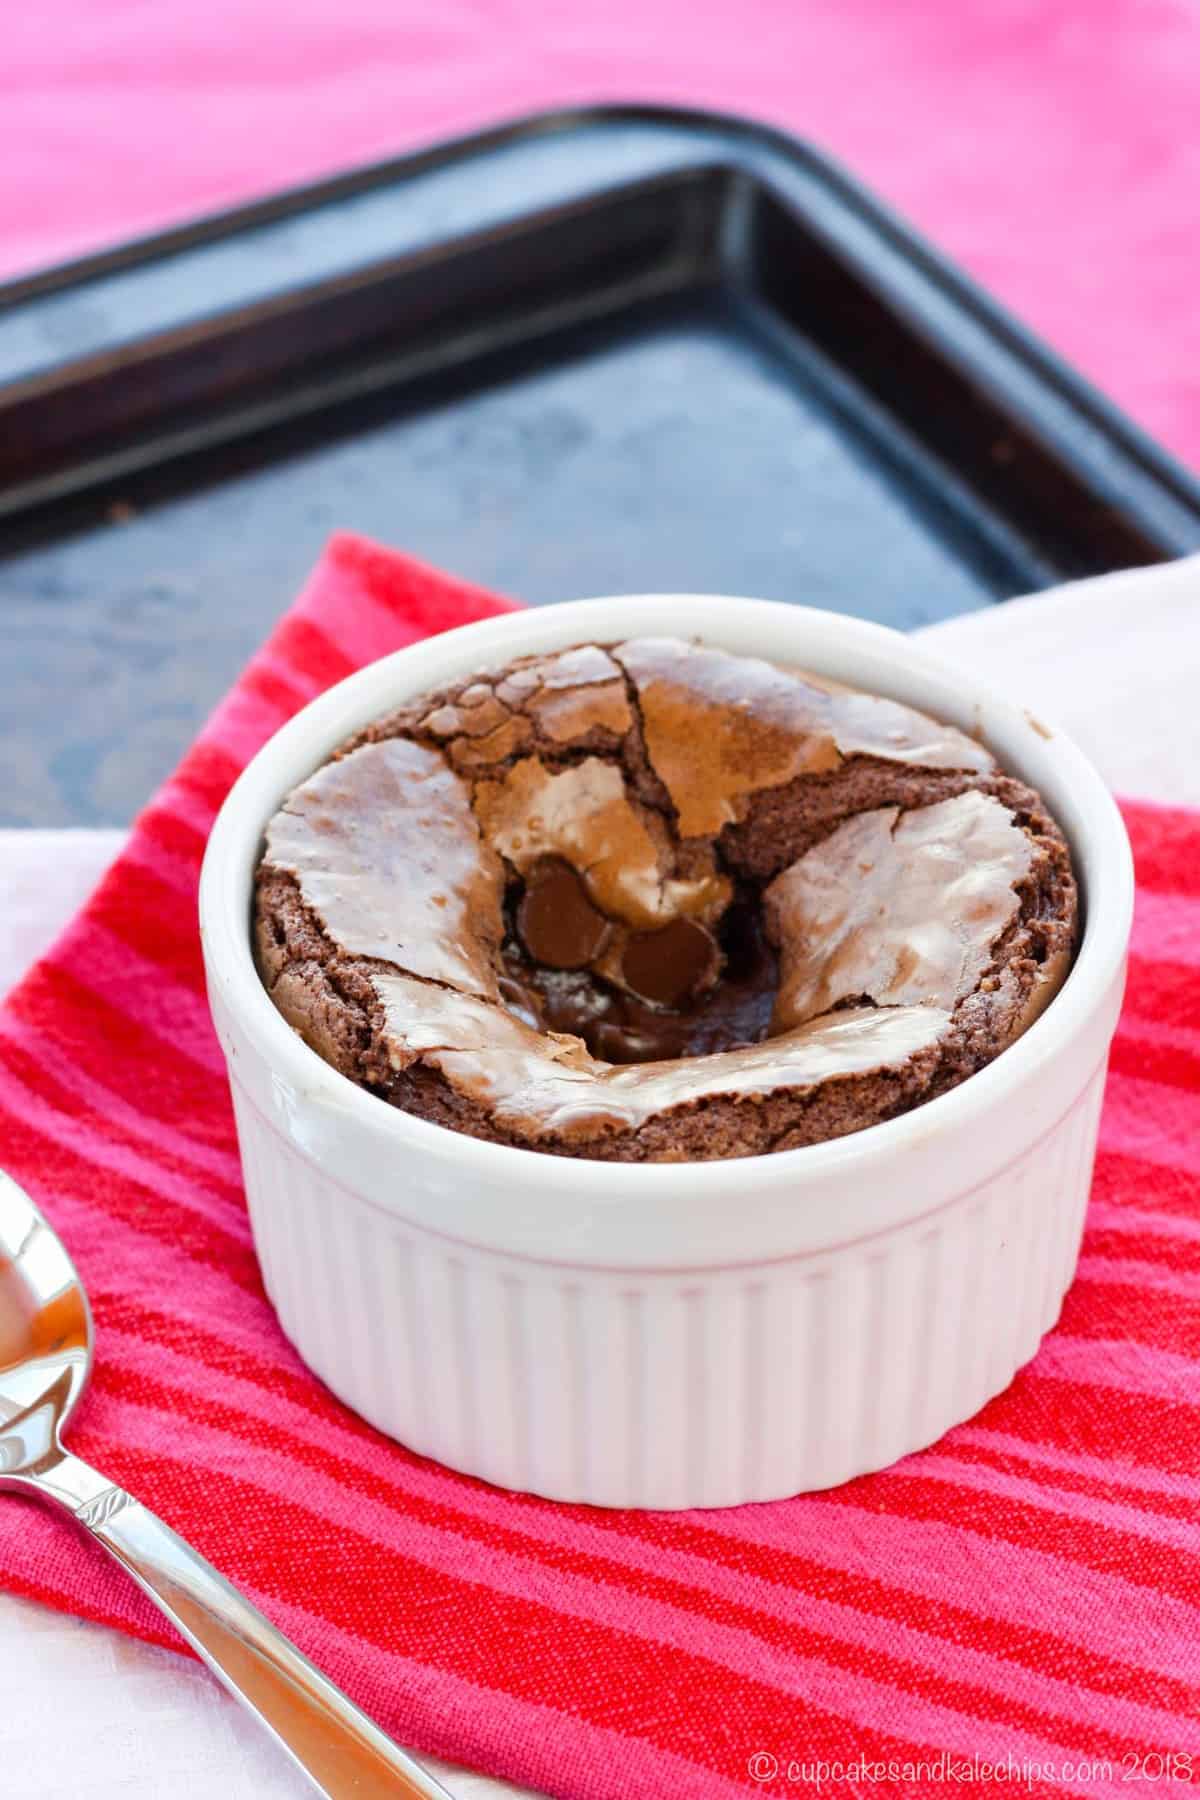 A brownie baked in a ramekin on top of red and white cloth napkins.